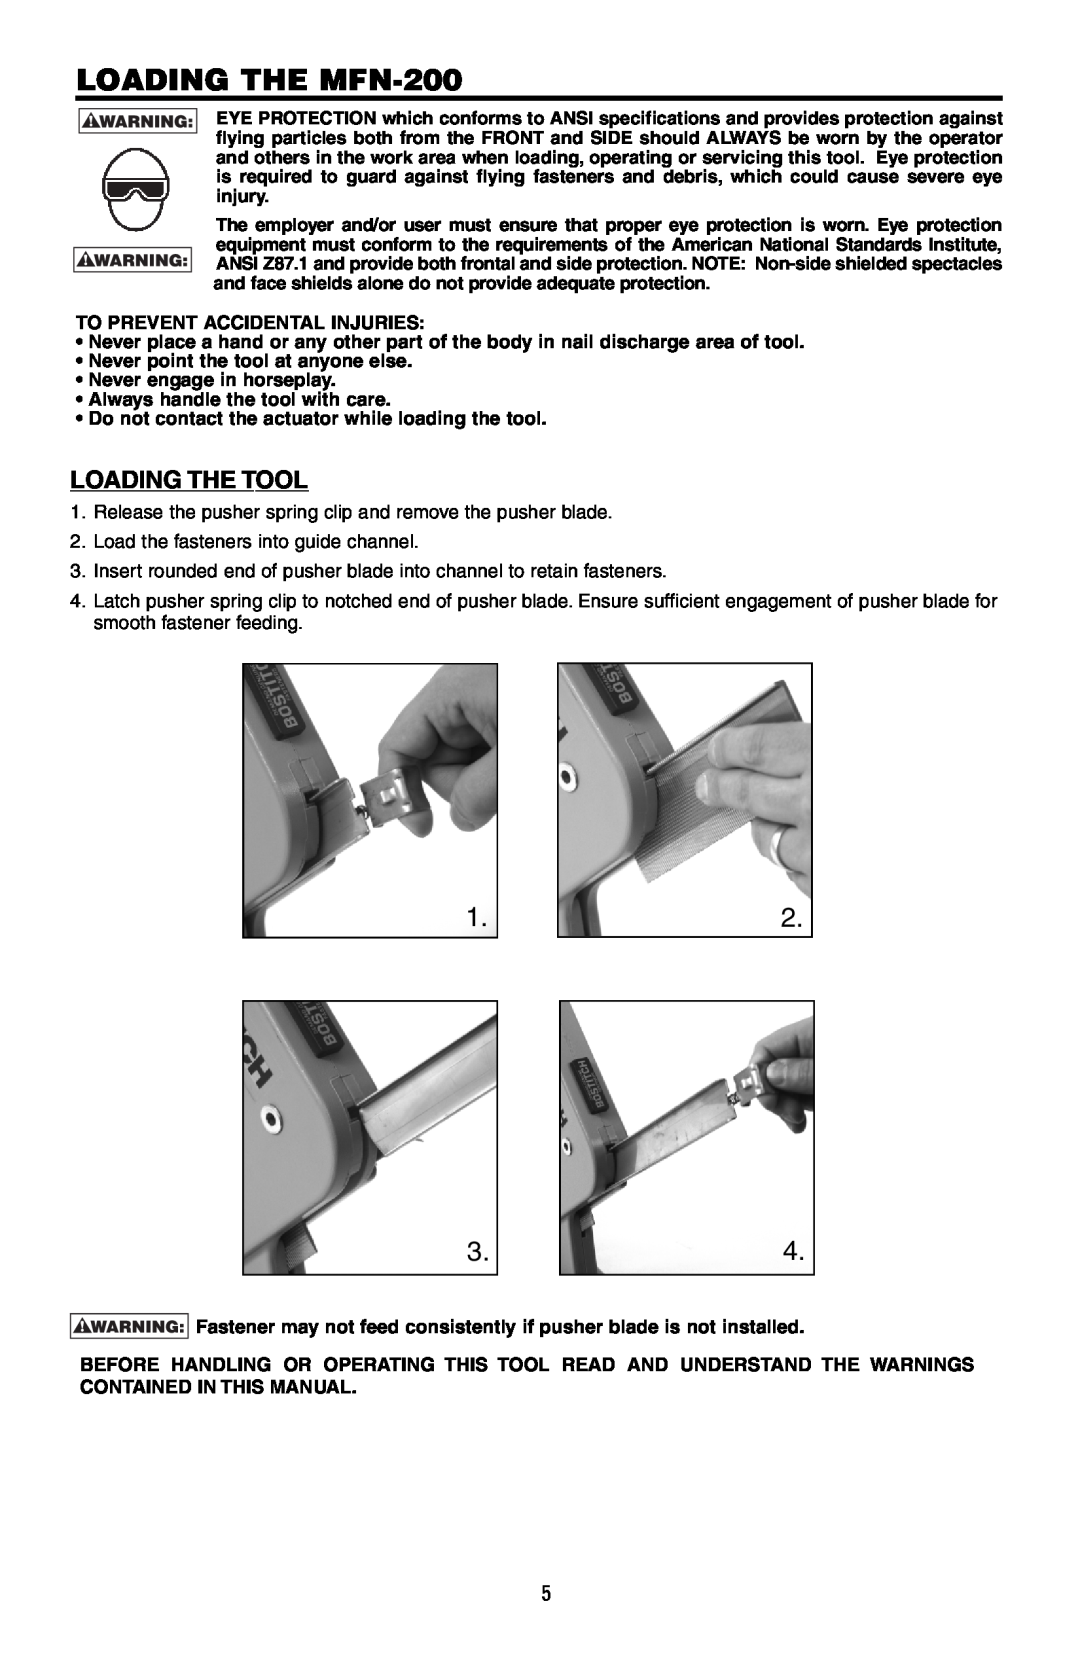 Bostitch 175616REVB manual LOADING THE MFN-200, Loading The Tool 